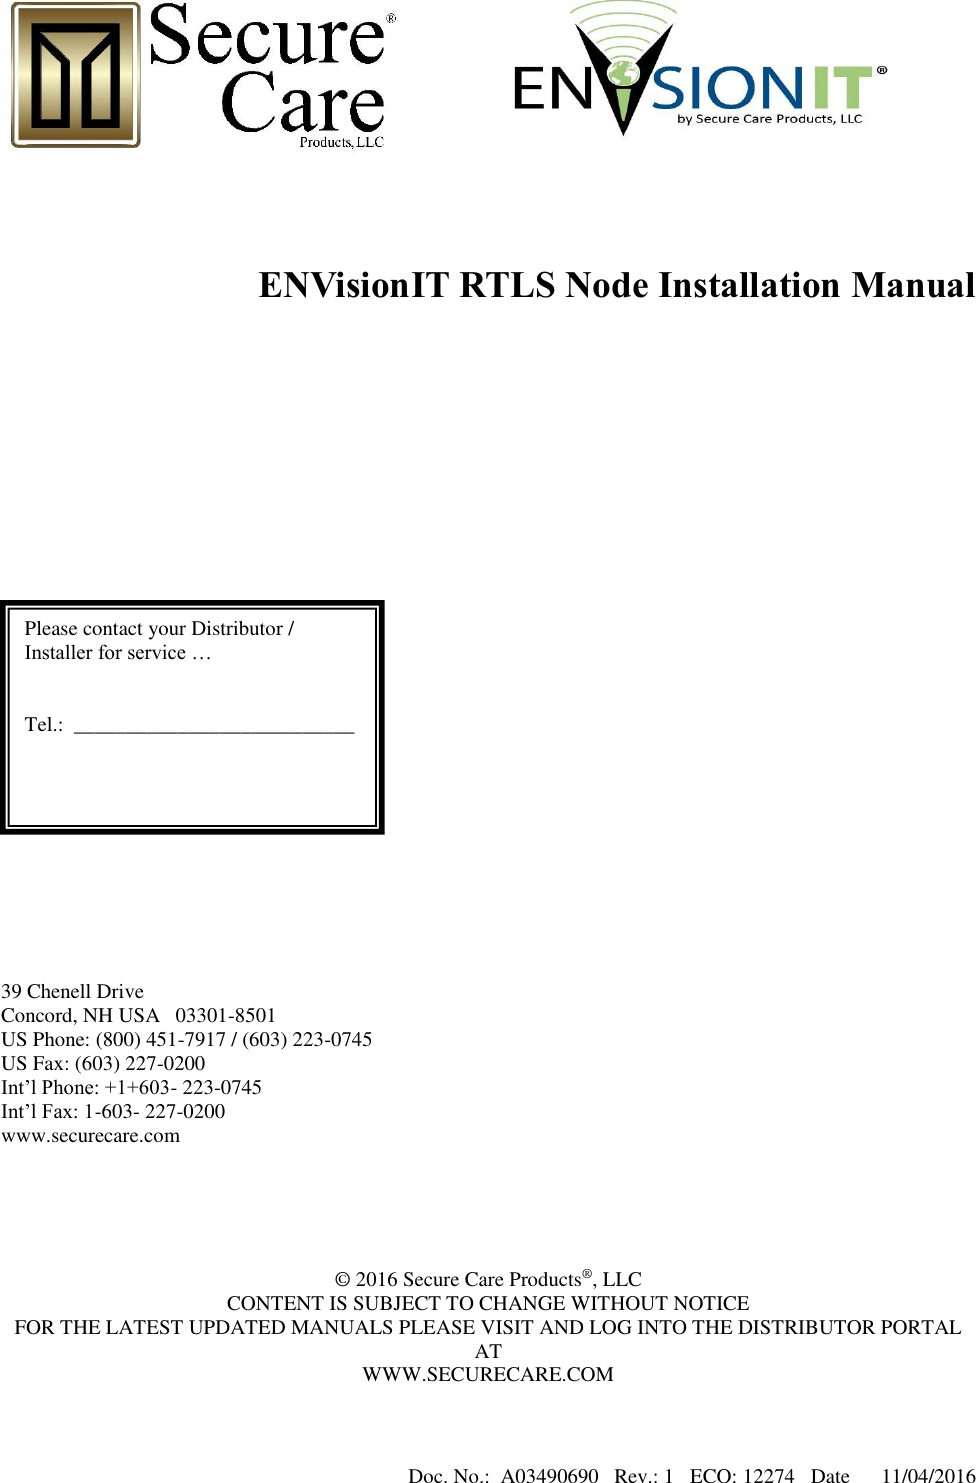 Doc. No.:  A03490690   Rev.: 1   ECO: 12274   Date      11/04/2016             ENVisionIT RTLS Node Installation Manual                  39 Chenell Drive Concord, NH USA   03301-8501 US Phone: (800) 451-7917 / (603) 223-0745 US Fax: (603) 227-0200 Int’l Phone: +1+603- 223-0745 Int’l Fax: 1-603- 227-0200 www.securecare.com      © 2016 Secure Care Products®, LLC CONTENT IS SUBJECT TO CHANGE WITHOUT NOTICE FOR THE LATEST UPDATED MANUALS PLEASE VISIT AND LOG INTO THE DISTRIBUTOR PORTAL AT WWW.SECURECARE.COM  Please contact your Distributor / Installer for service …   Tel.:  ___________________________  